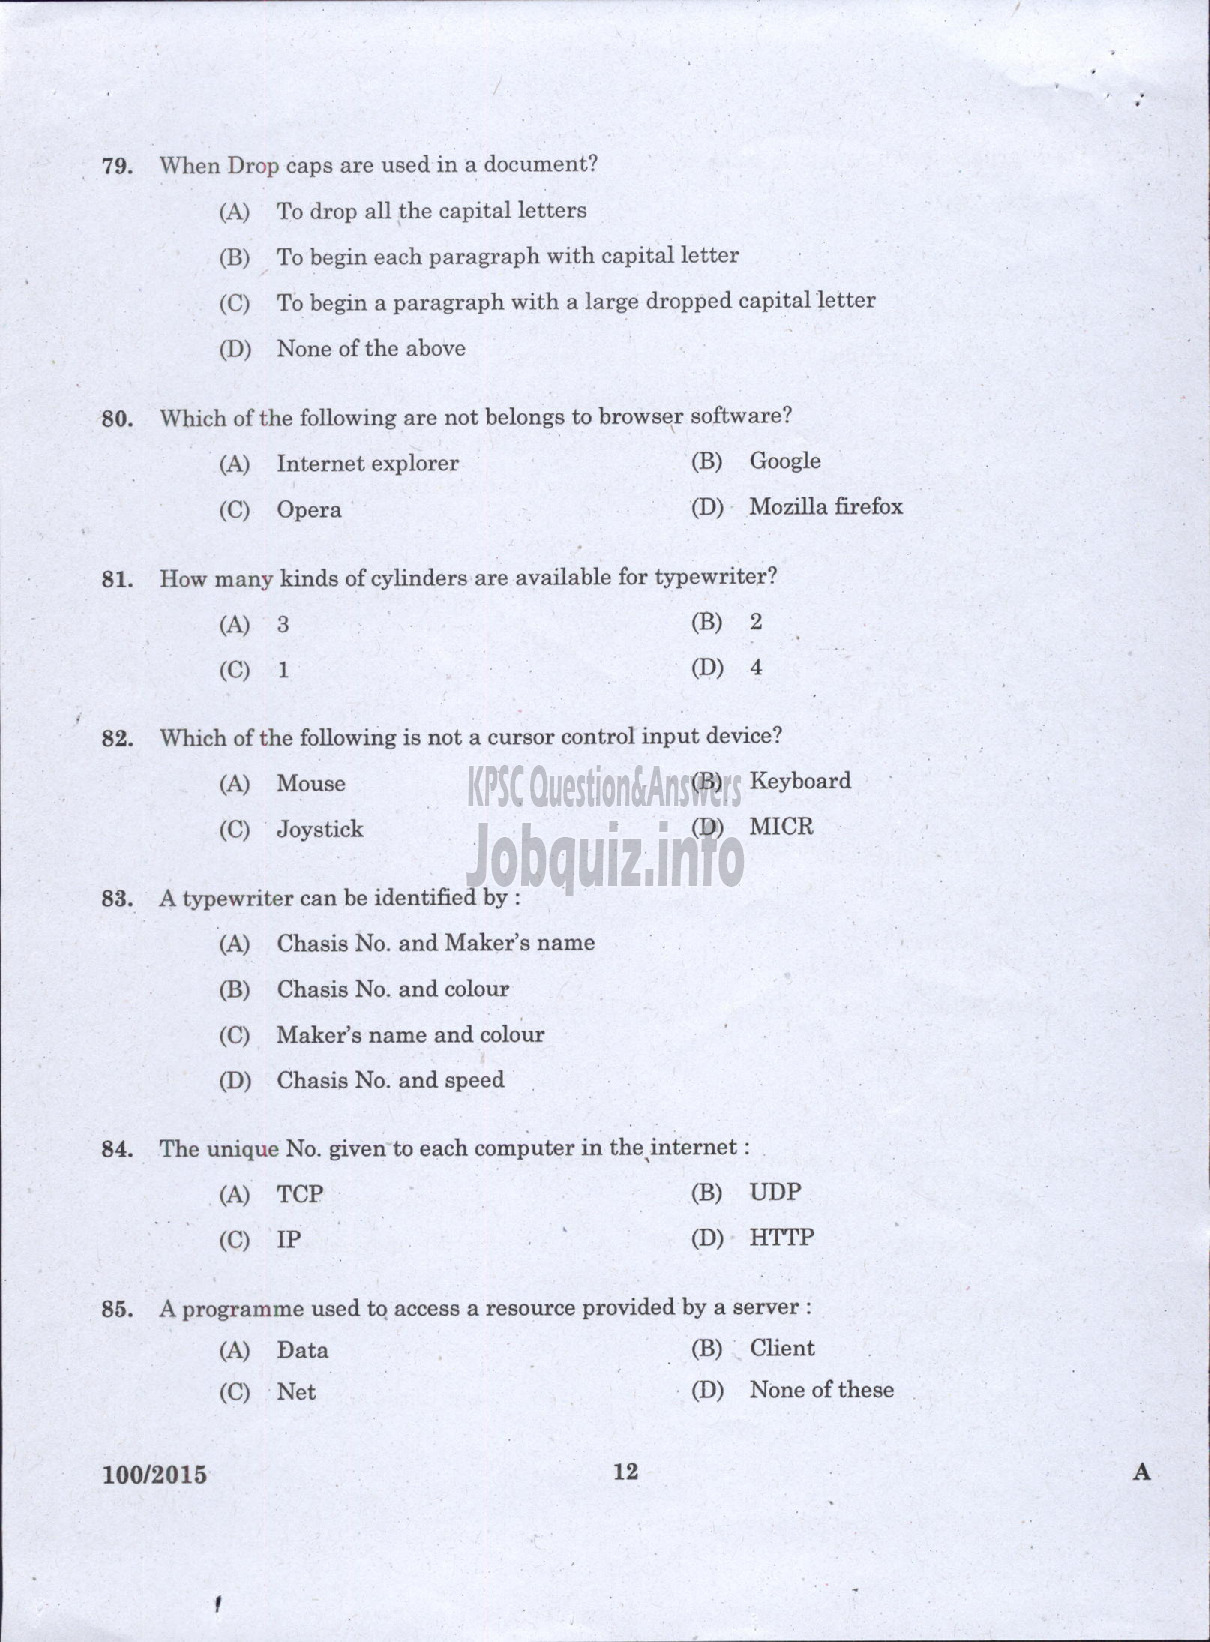 Kerala PSC Question Paper - TYYPIST GRADE II / STENO TYPIST / CLERK TYPIST / TYPIST KERALA STATE HOUSING BOARD / KERALA SHIPPING AND INLAND NAVIGATION CORP LTD / VARIOUS / KERALA ELECTRICAL AND ALLIED ENGINEERING COMPANY LTD-10